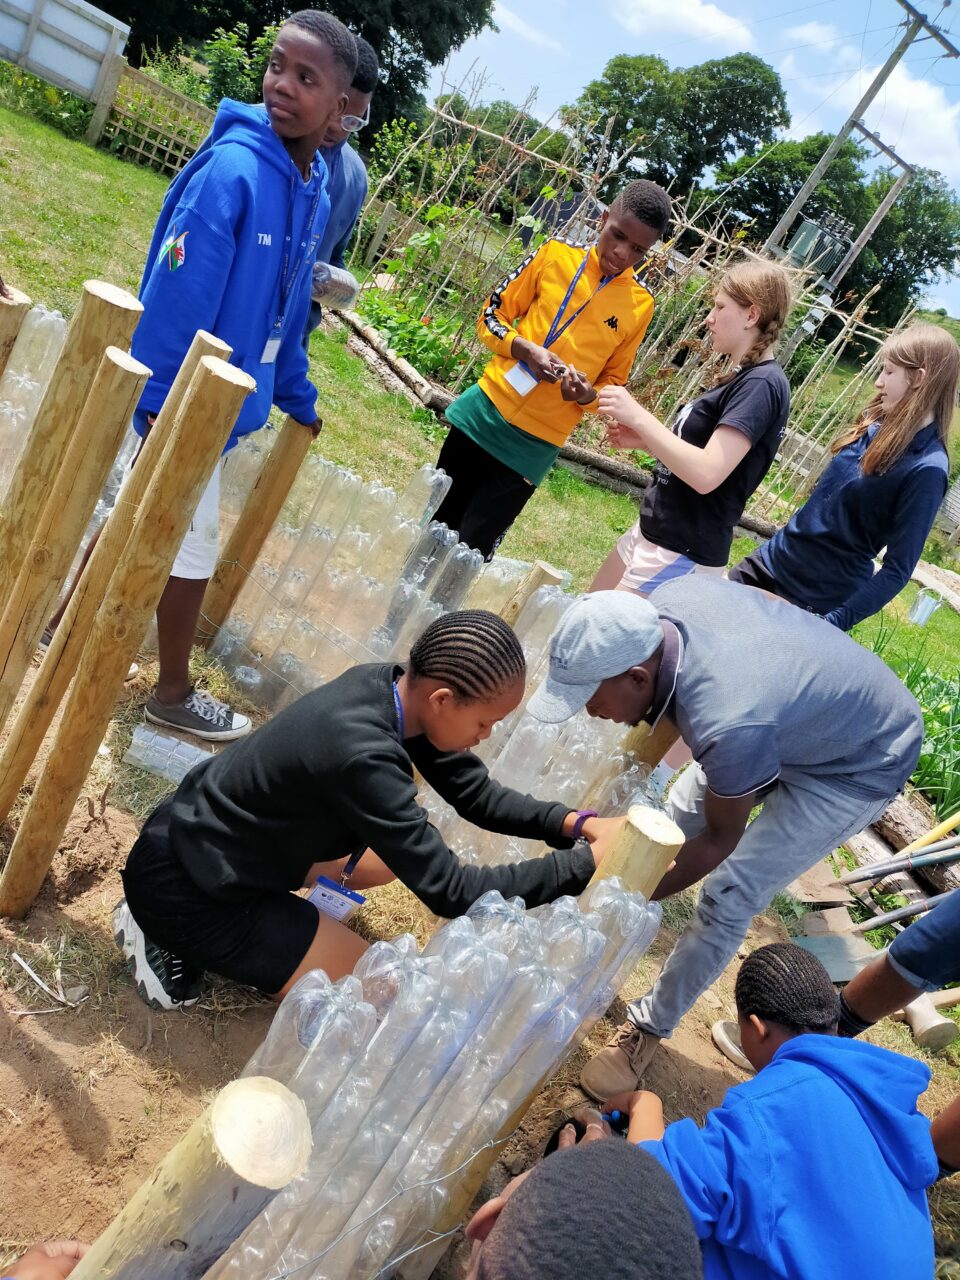 Some young people lining up plastic bottles. There are other young people standing in the background.